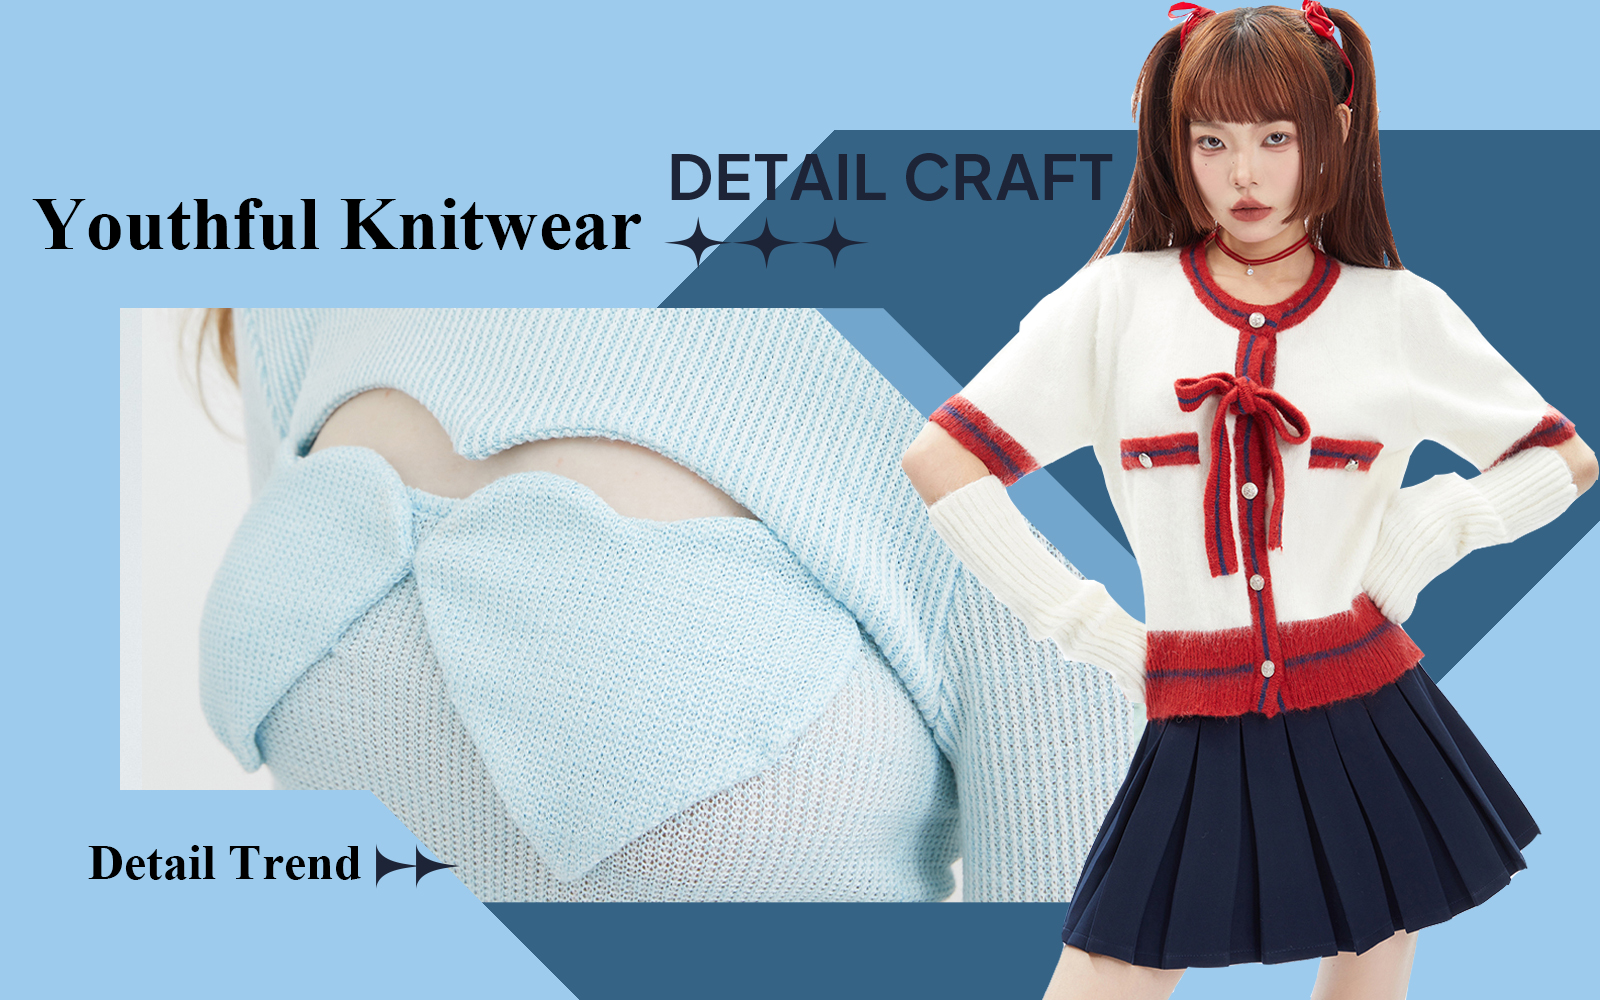 Young Lady -- The Detail & Craft Trend for Women's Knitwear